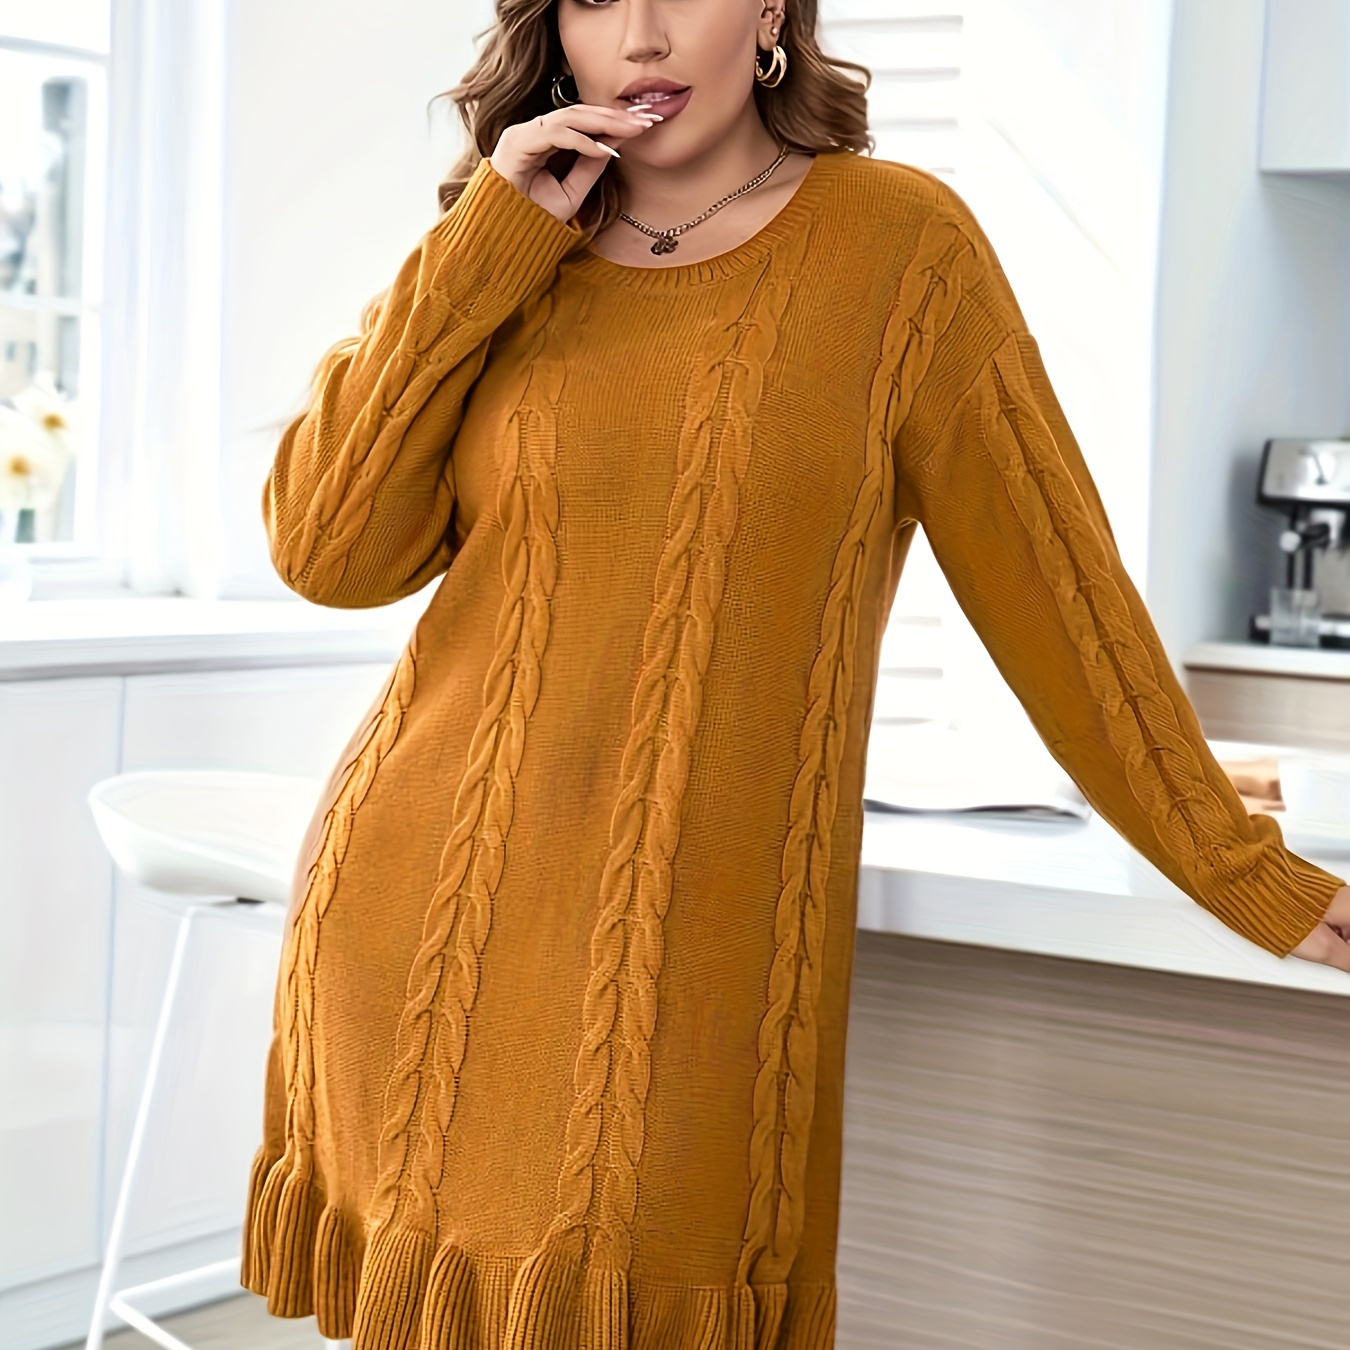 

Plus Size Casual Sweater Dress, Women's Plus Solid Cable Knit Round Neck Long Sleeve Ruffle Trim Slight Stretch Sweater Dress